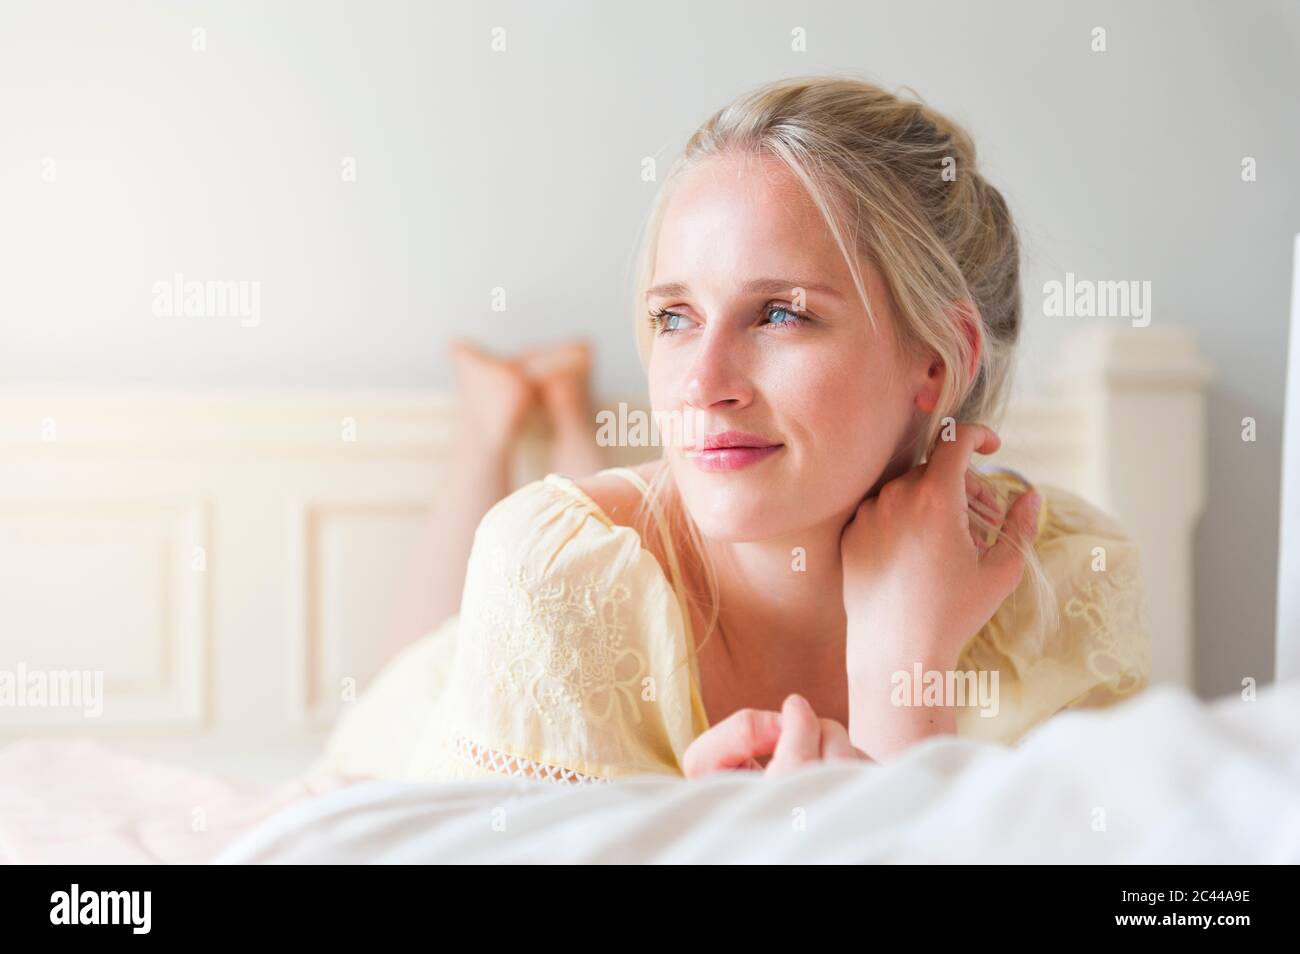 Portrait of smiling blond woman with blue eyes lying on bed Stock Photo